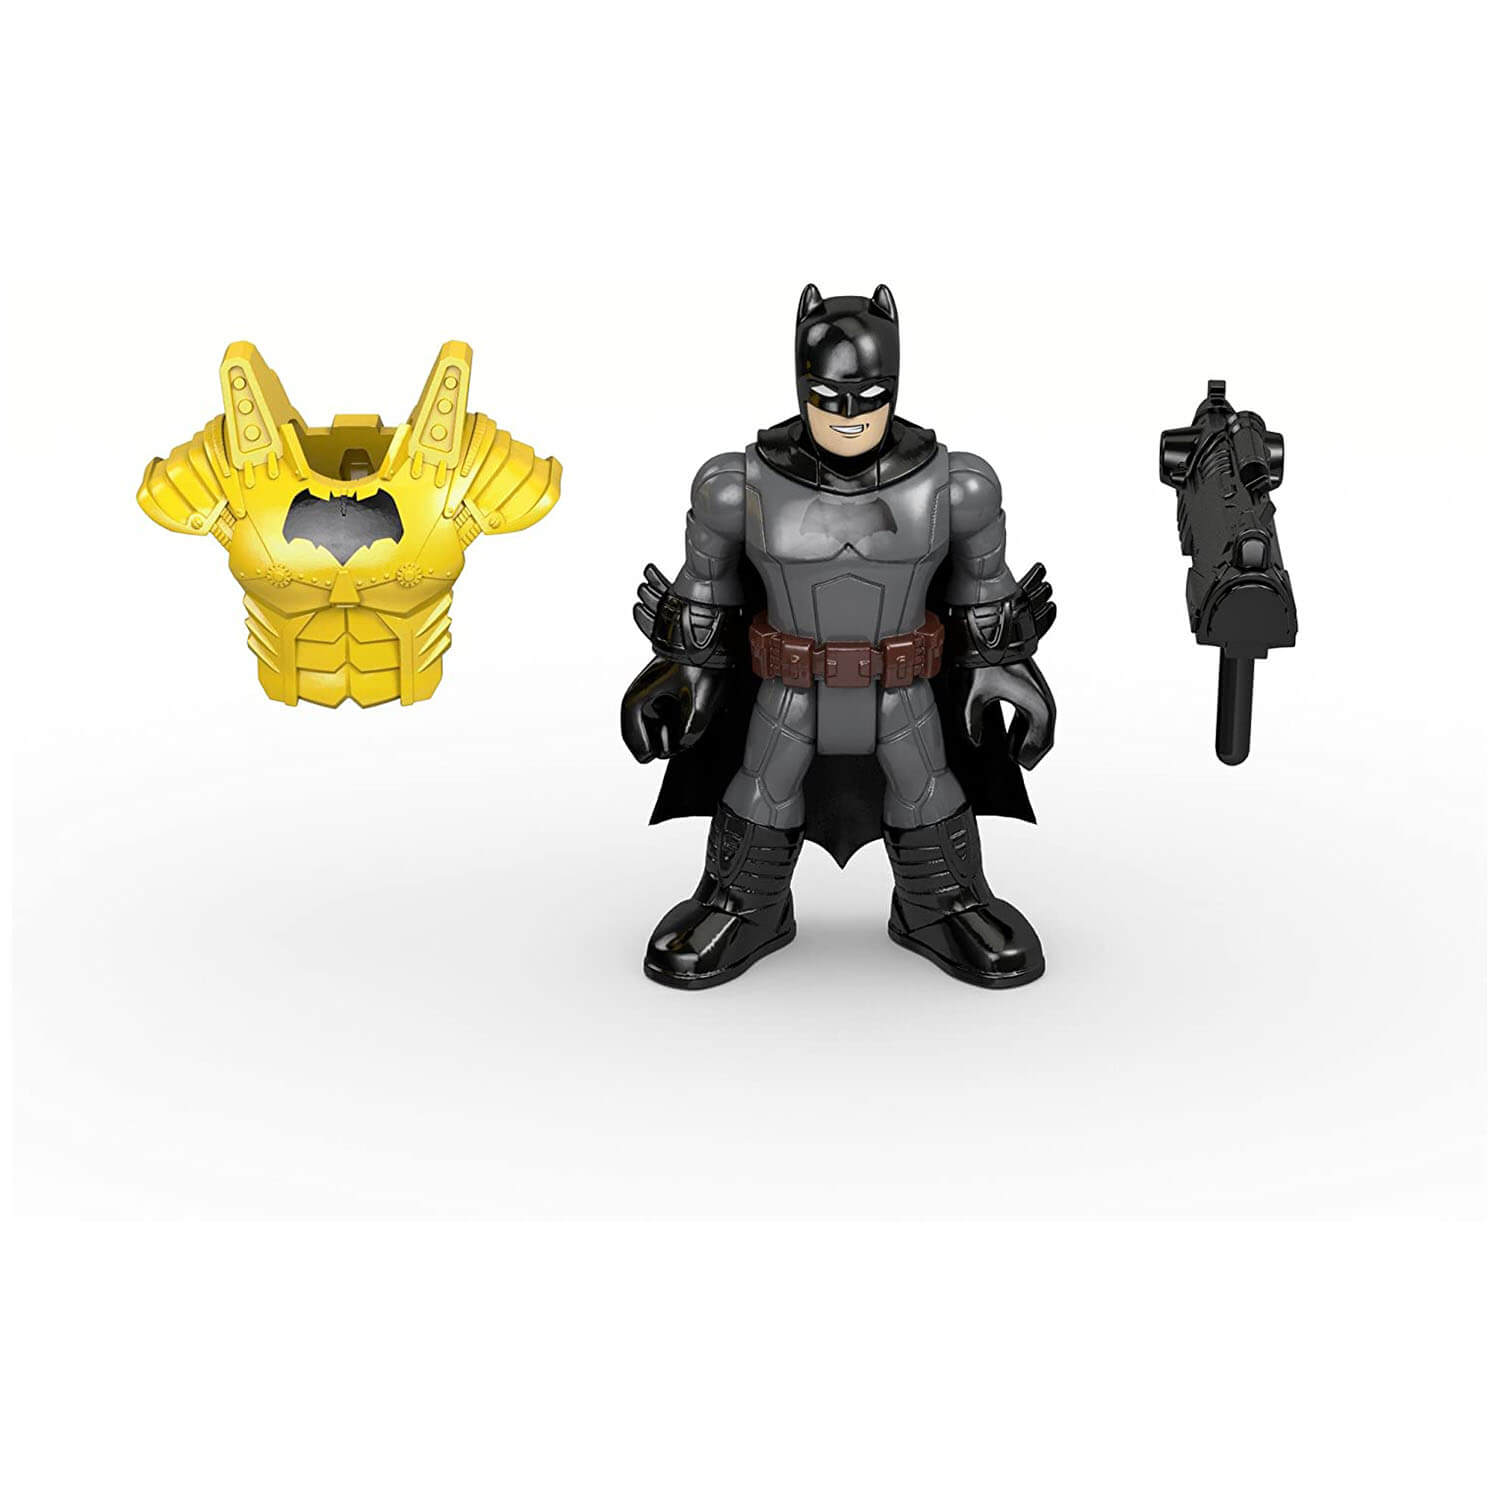 Front view of batman figure included.